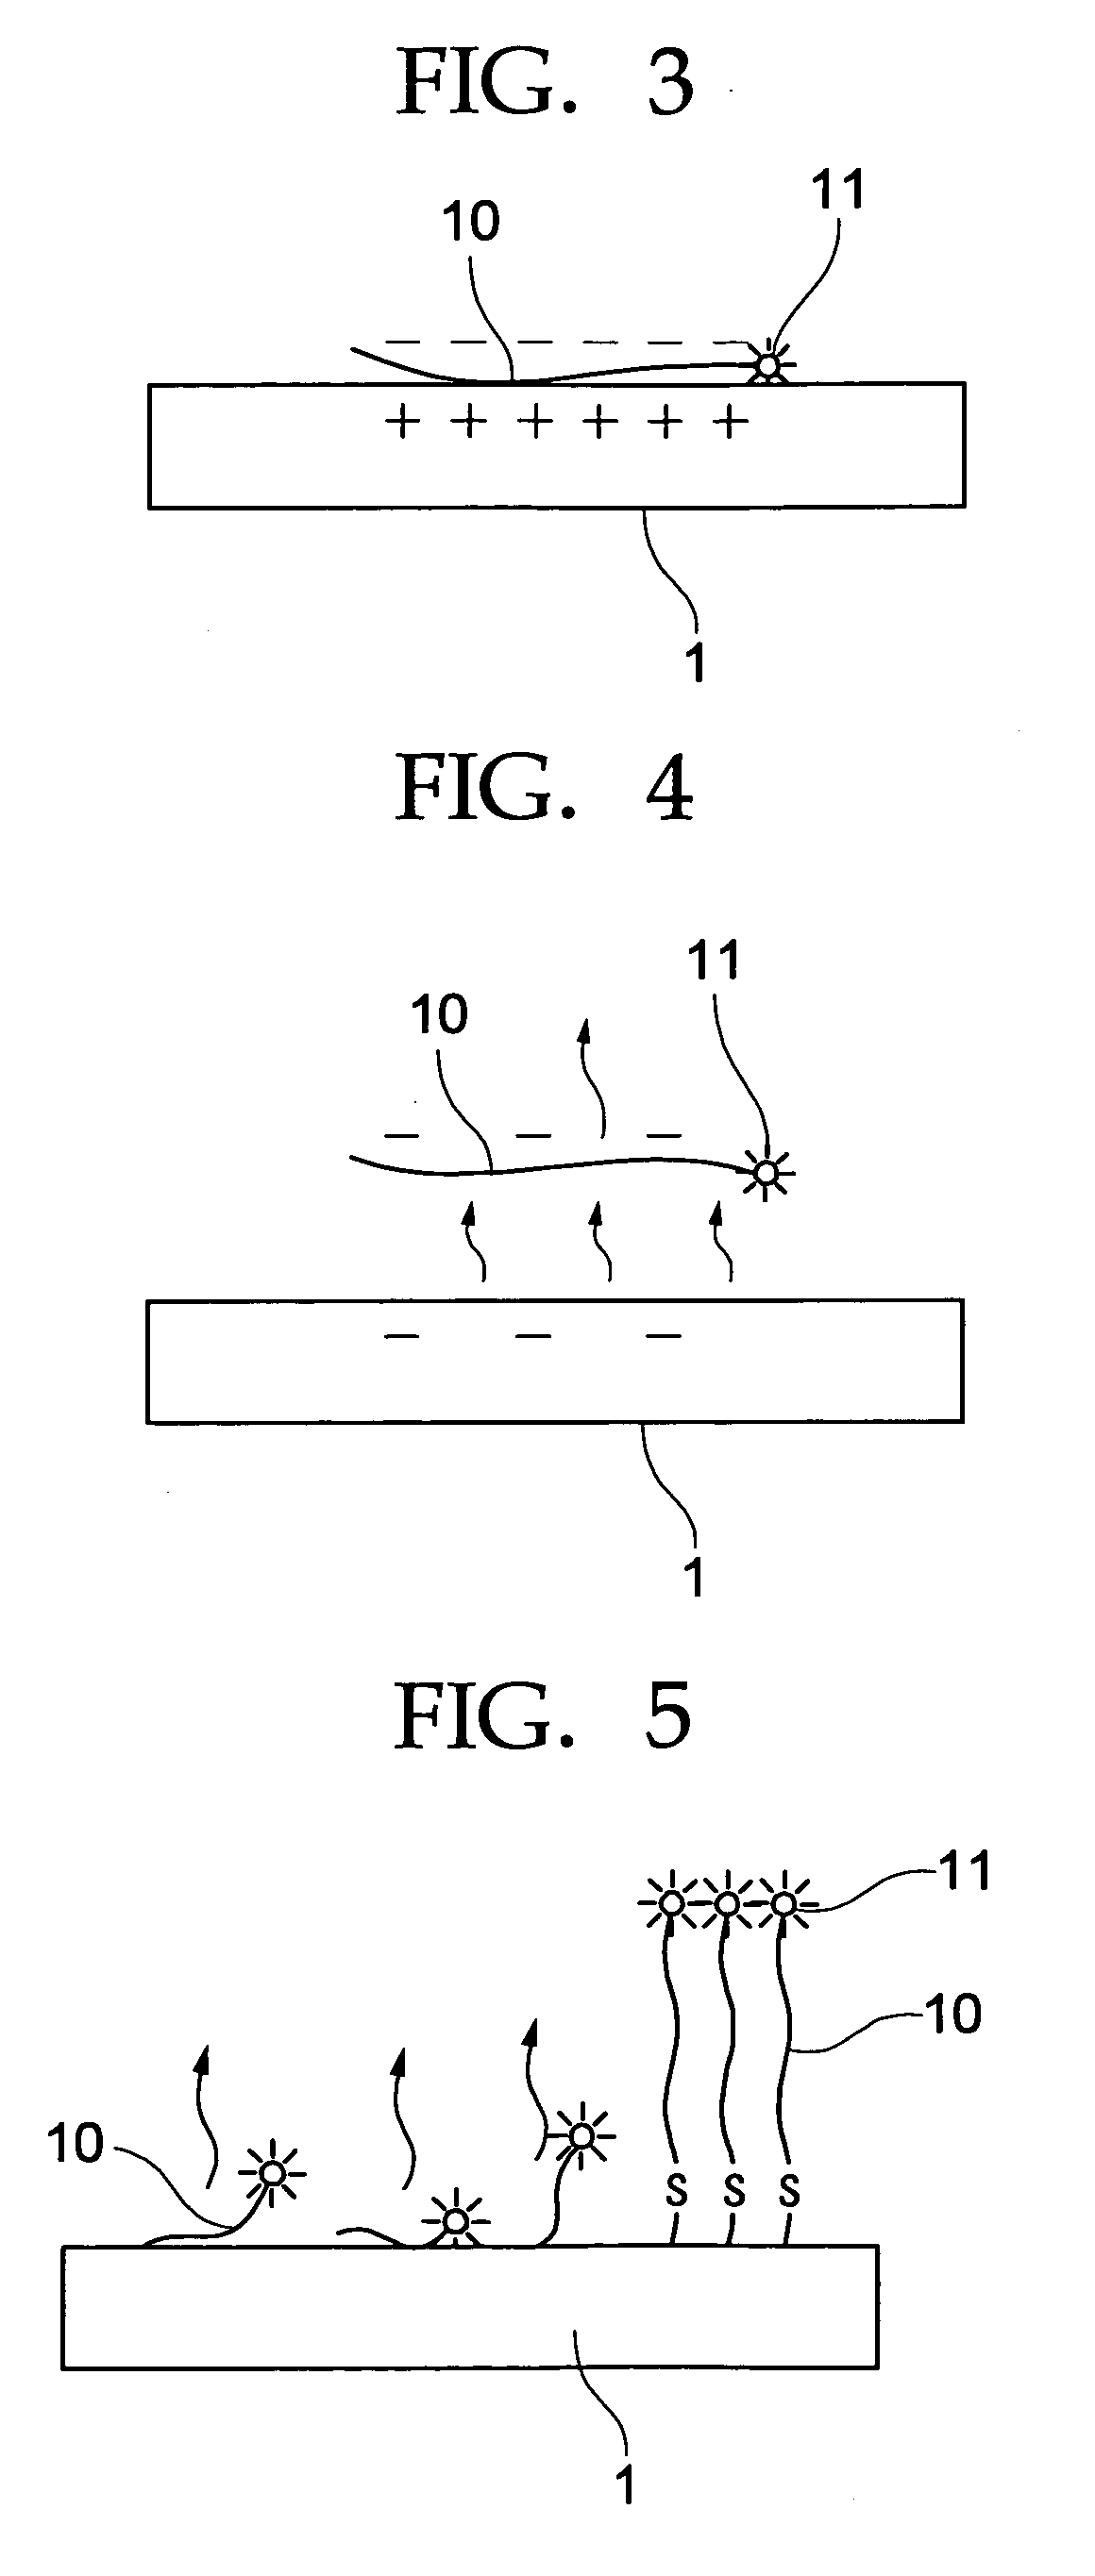 Target detecting device and target capturer, device and method for molecular adsorption or desorption, and device and method for protein detection